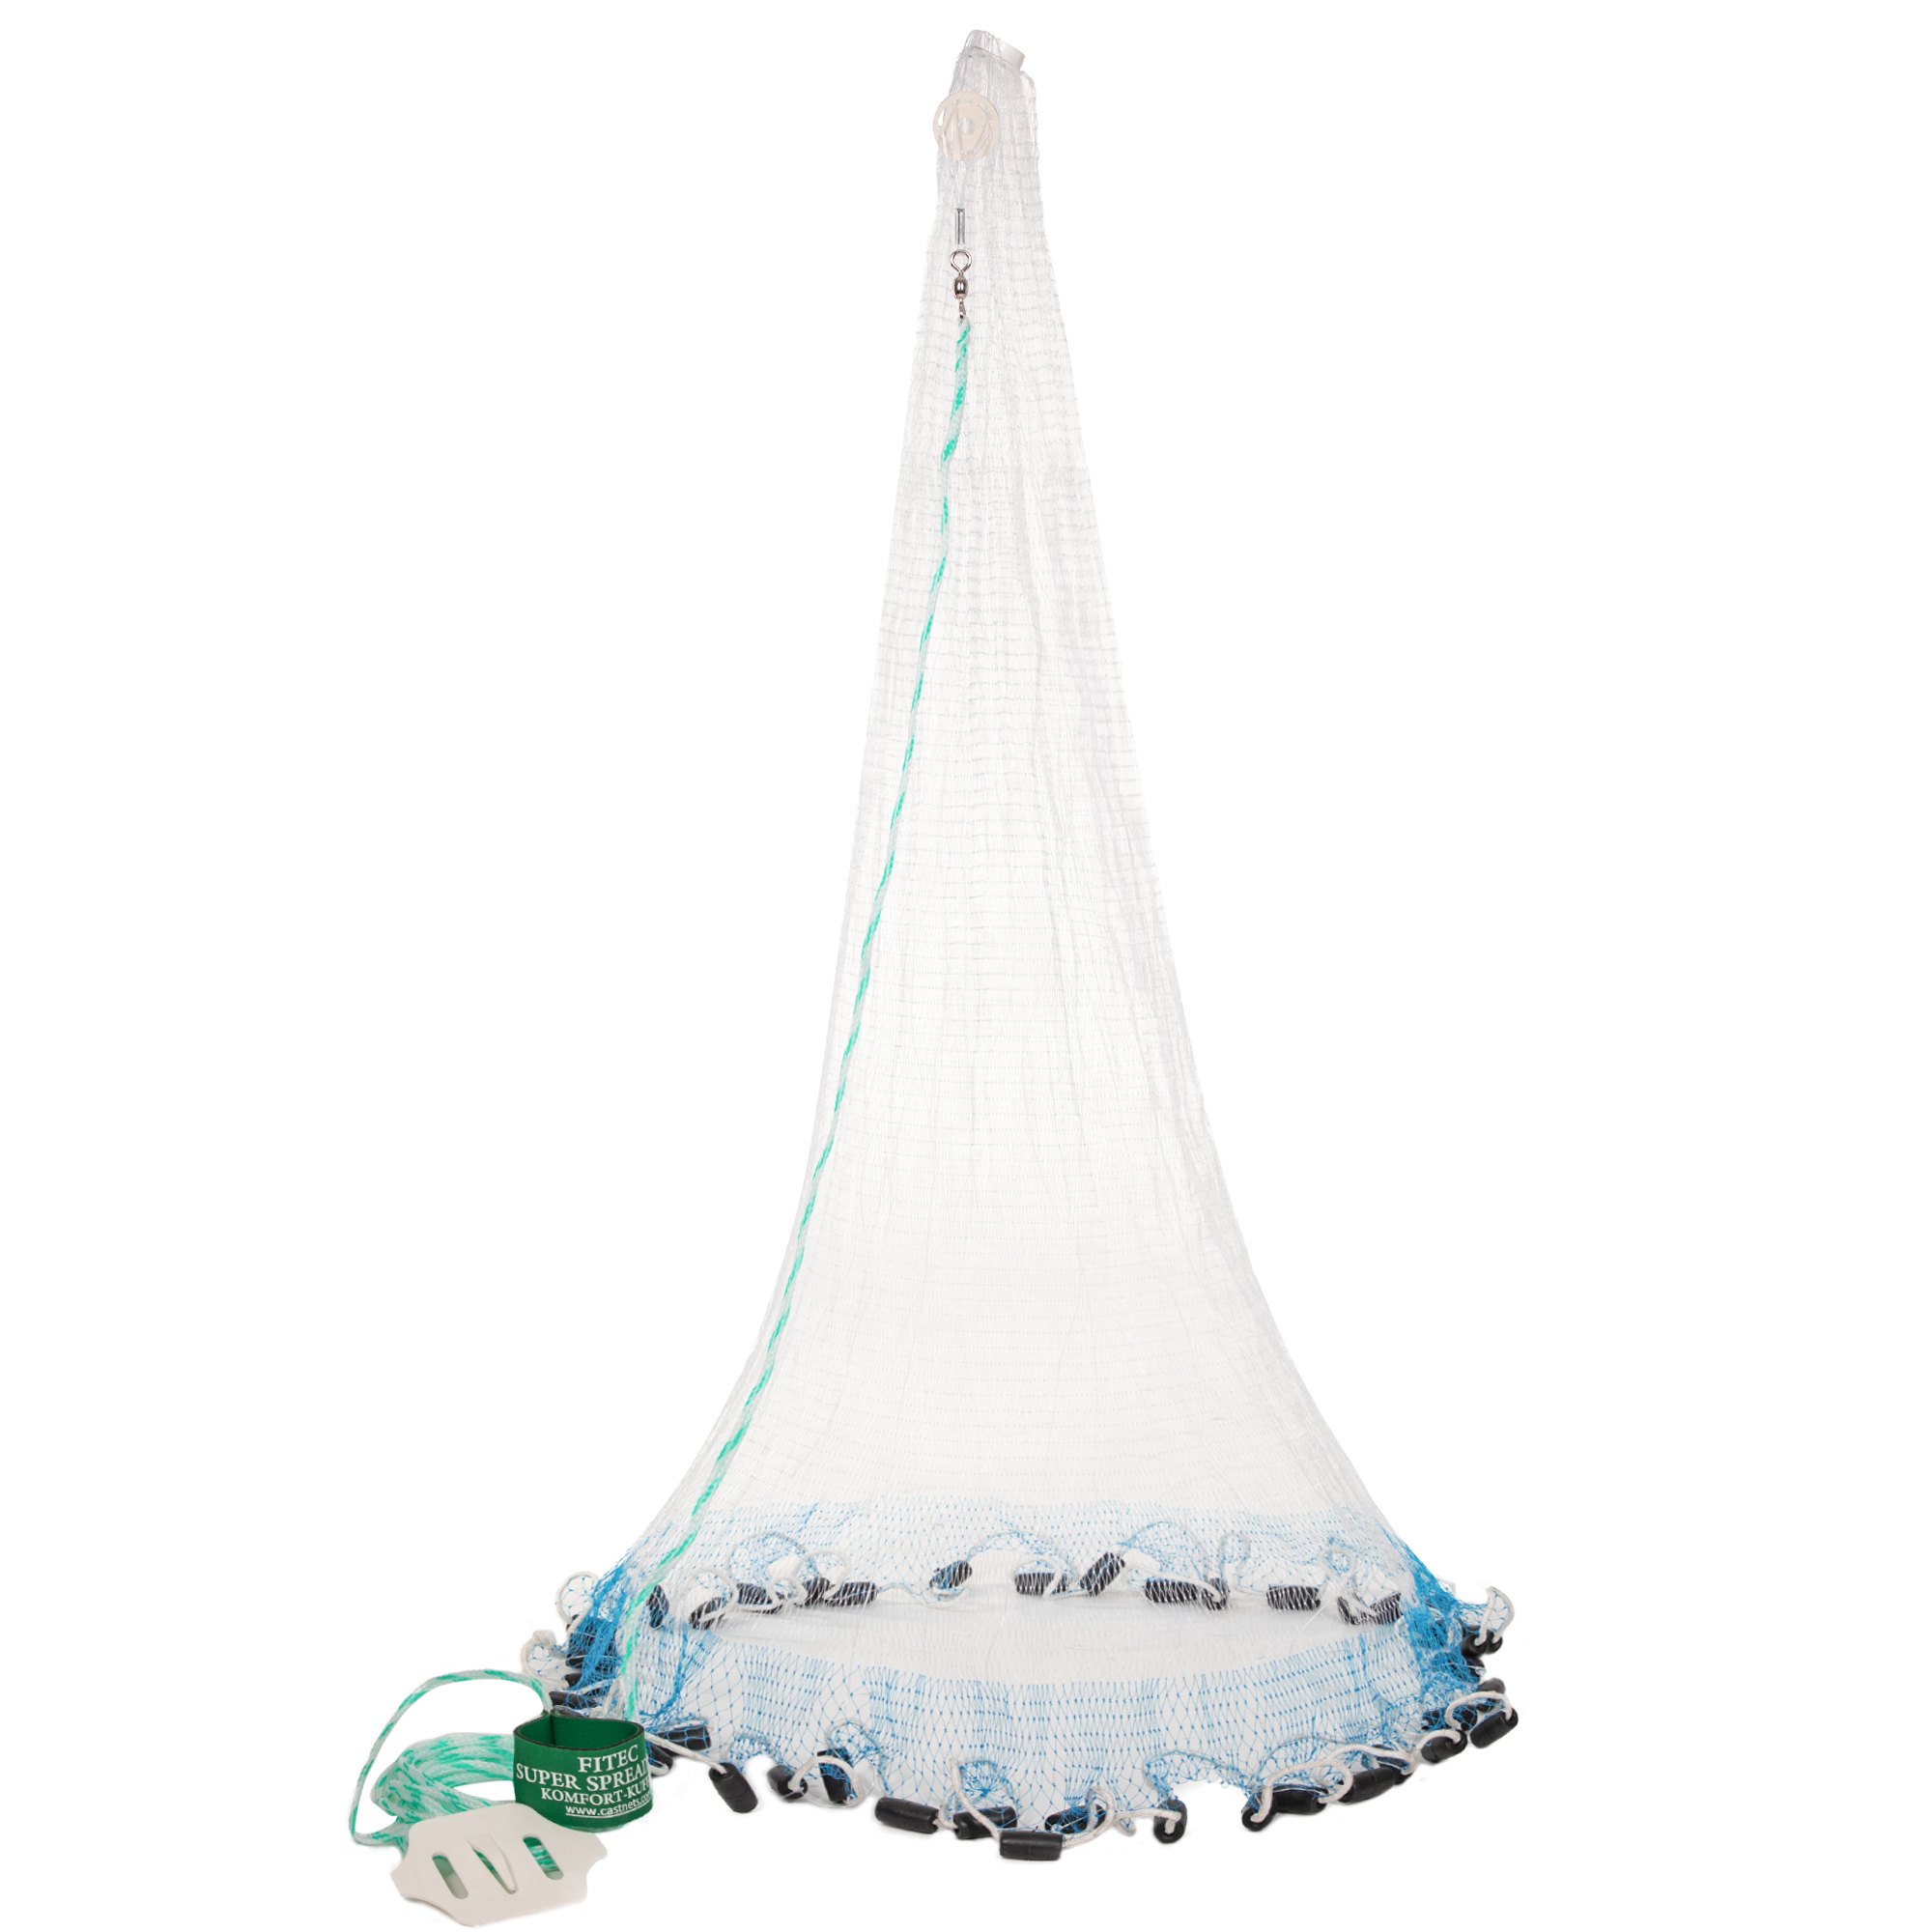 FITEC MAKES HIGH-QUALITY CAST NETS FOR EVERY ANGLER - Issuu